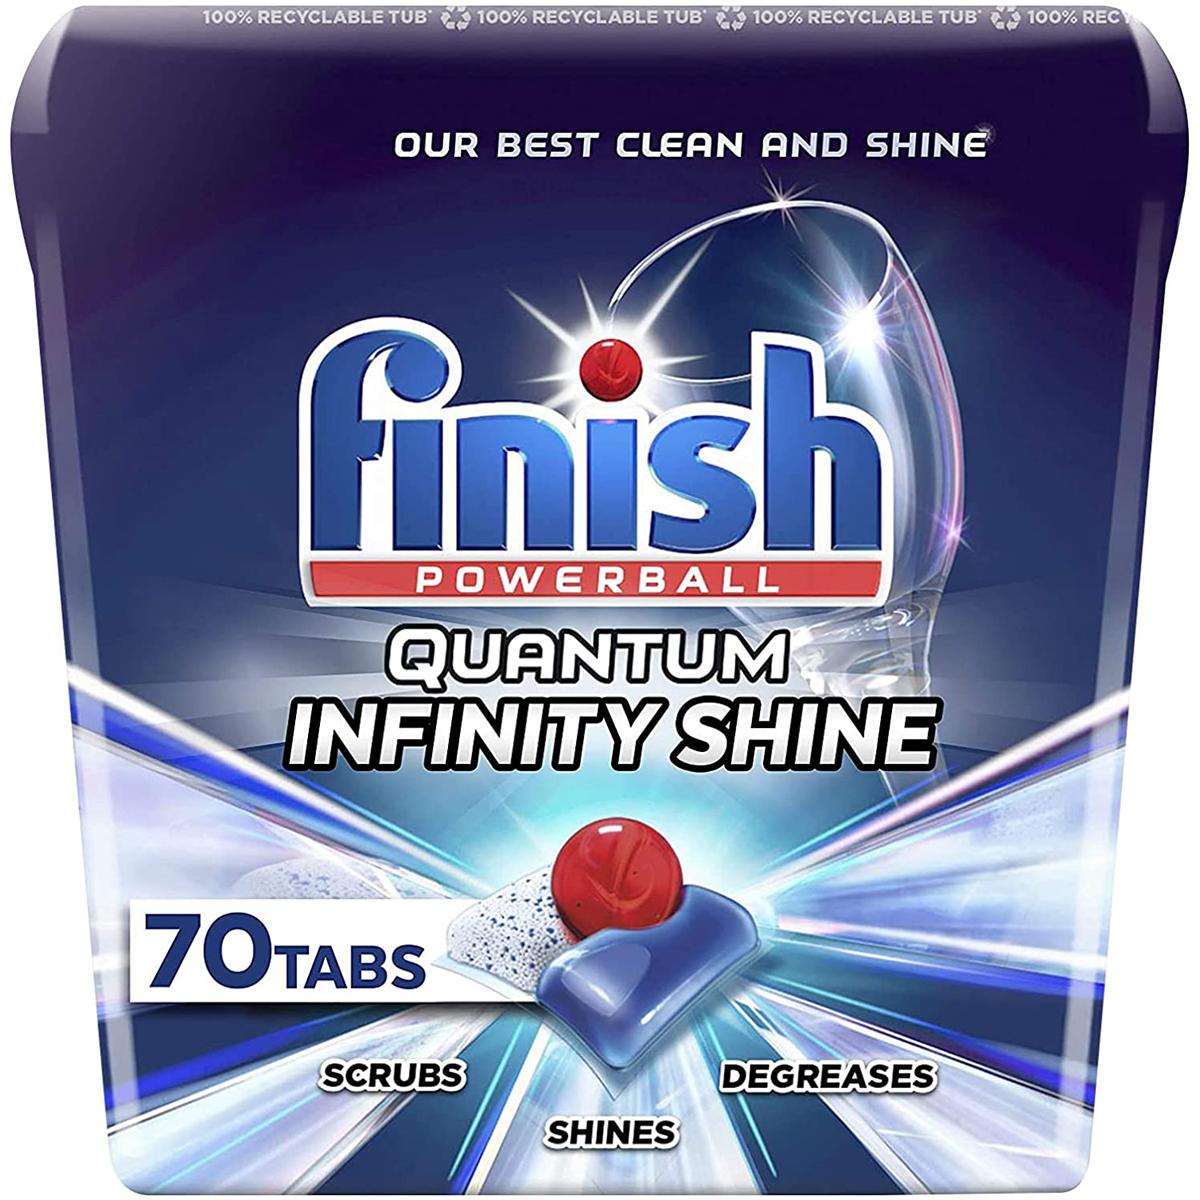 70 Finish Powerball Quantum Infinity Shine Dishwasher Detergent Tablets for $13.01